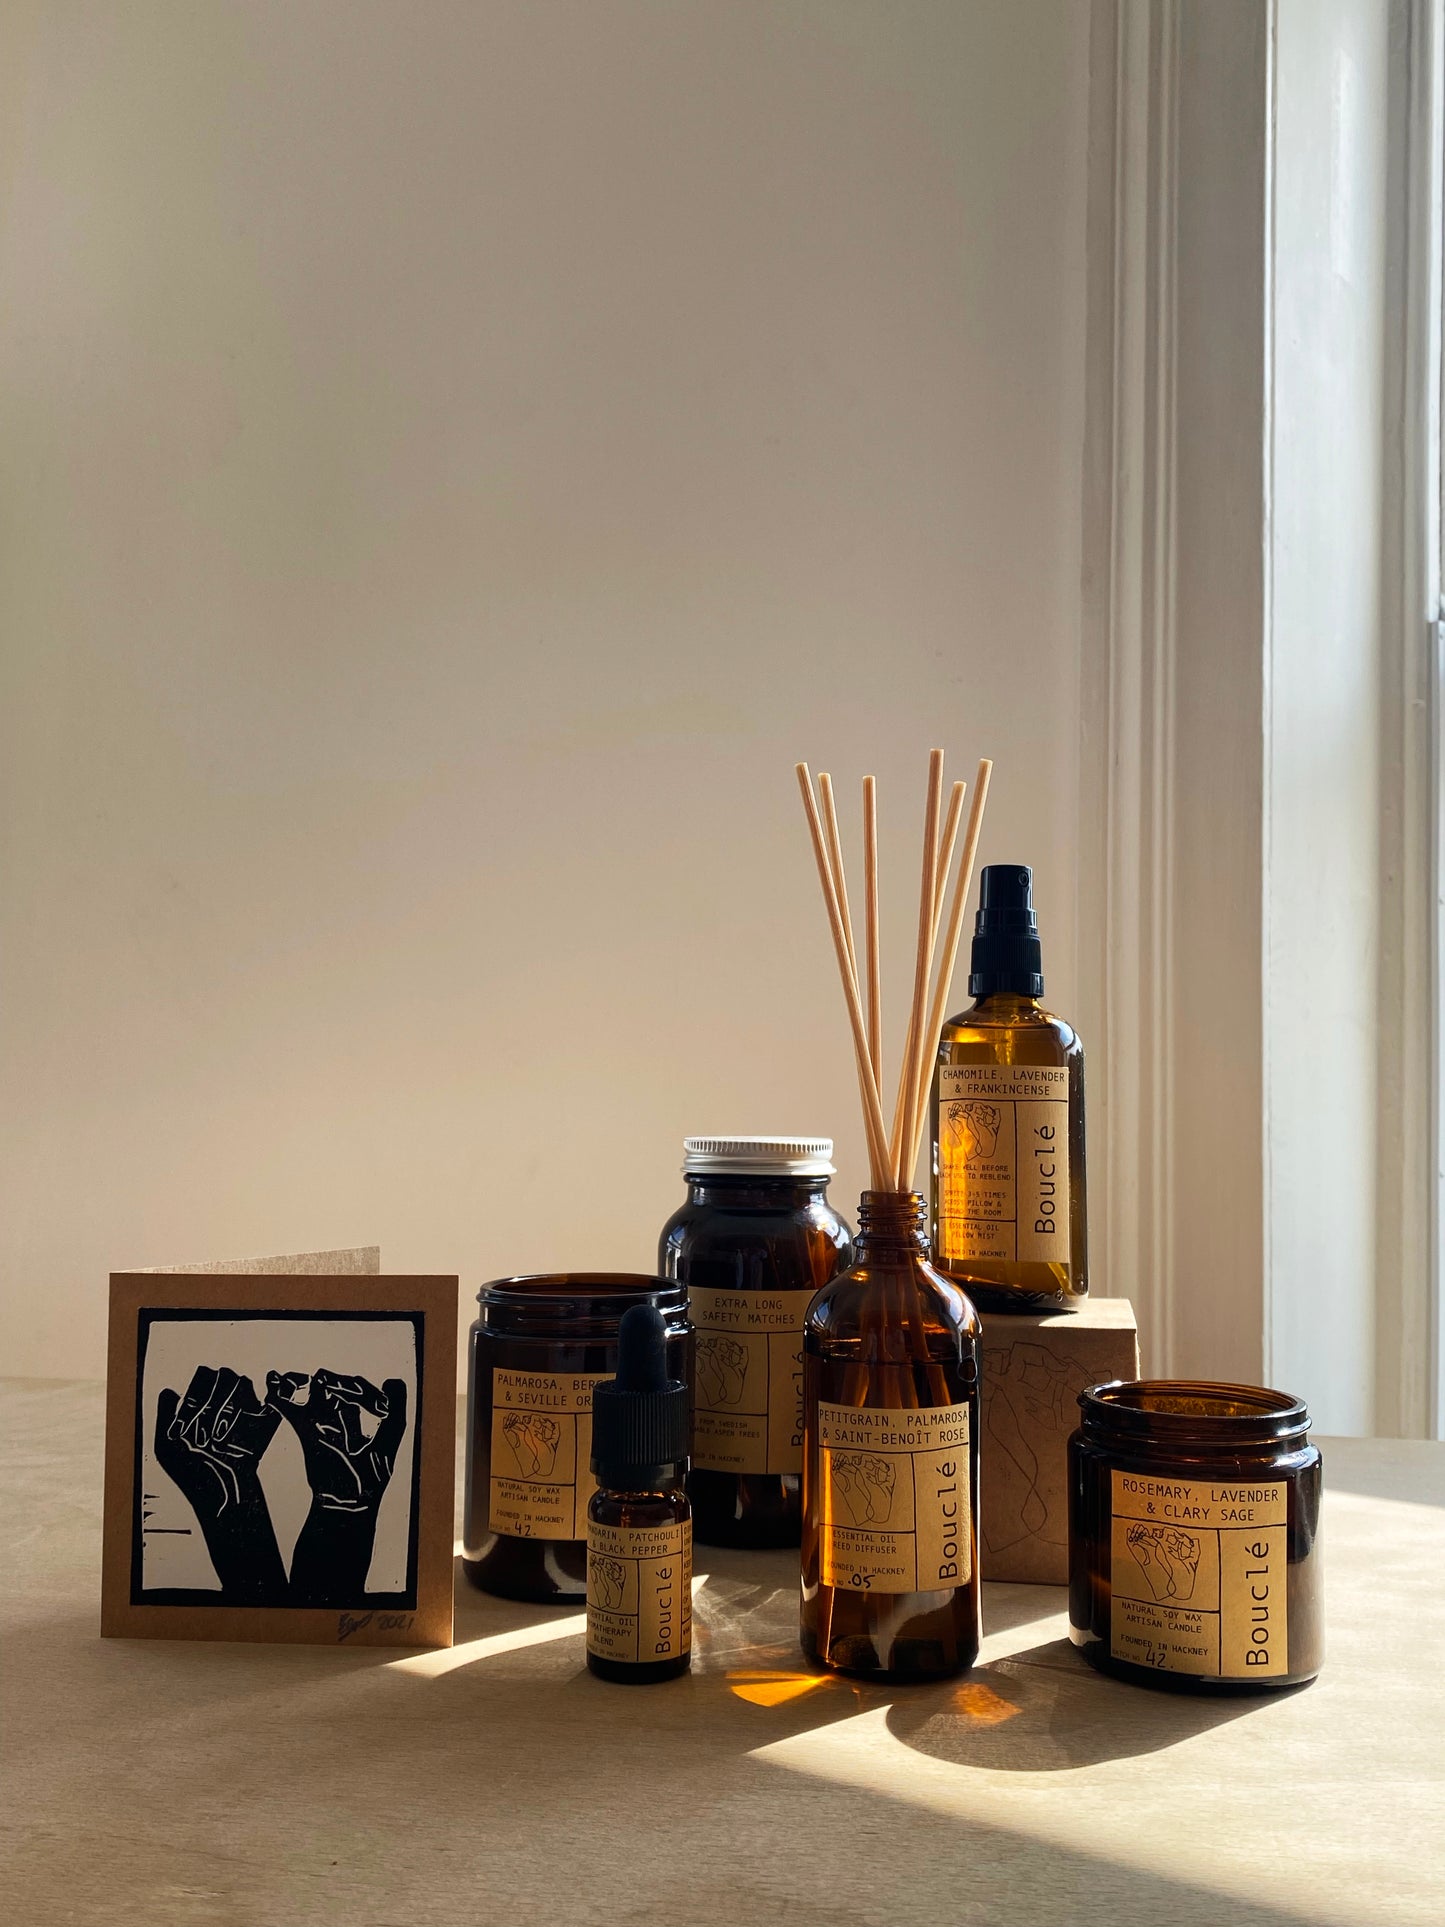 A selection of all-natural Bouclé products to make the perfect wedding hamper including soy wax candles, reed diffusers, room sprays, essential oil blends & a wedding card - all made in East London and Brighton